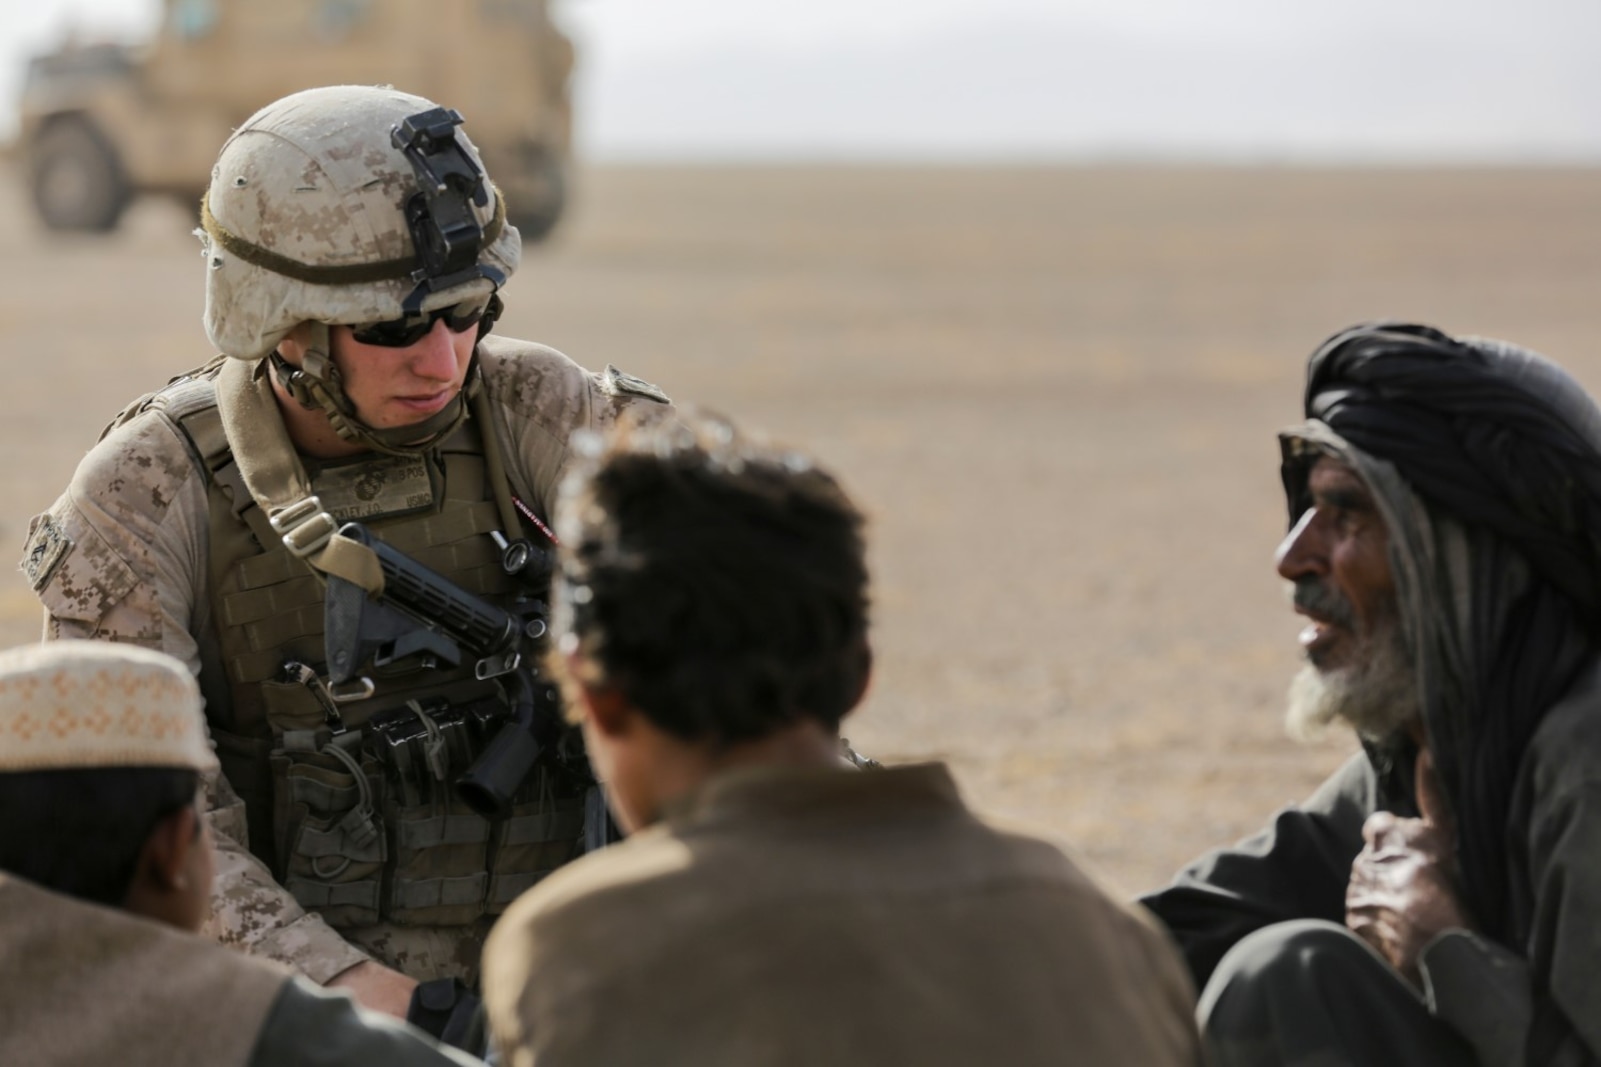 U.S. Marine Cpl. Justin Hinckley, a team leader with Weapons Company, 1st Battalion, 2d Marine Regiment, talks to a local family of the Washer district during a security patrol in Helmand province, Afghanistan on July 16, 2014. Patrols are conducted to disrupt enemy operations against Bastion- Leatherneck Complex. (Official U.S. Marine Corps photo by Cpl. John A. Martinez Jr. / Released)